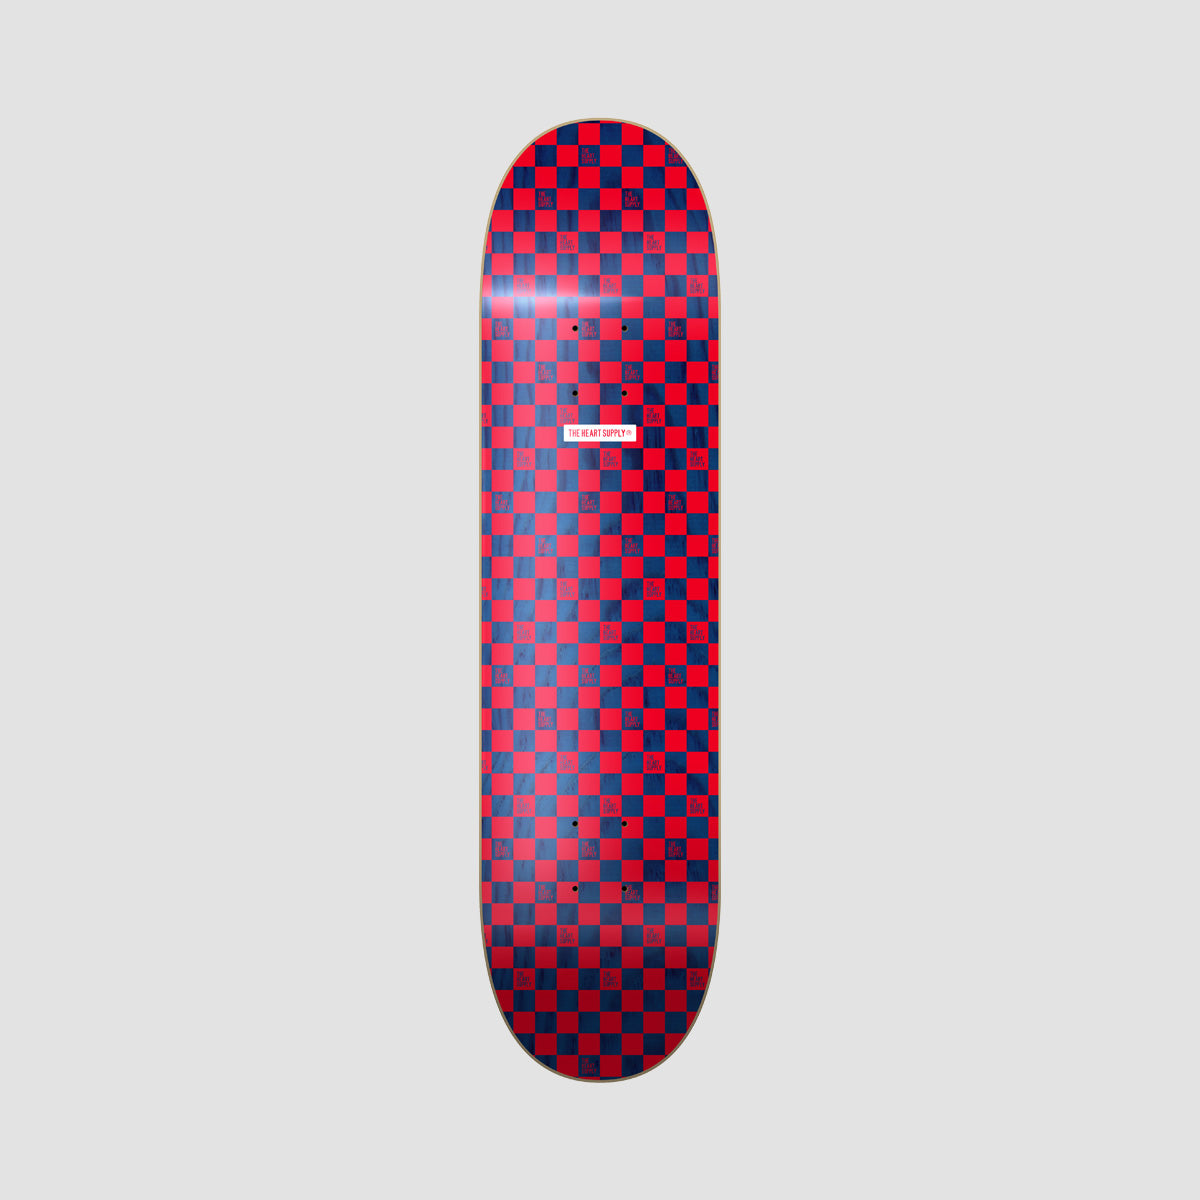 The Heart Supply Luxury Checkers Skateboard Deck Red/Blue - 8"